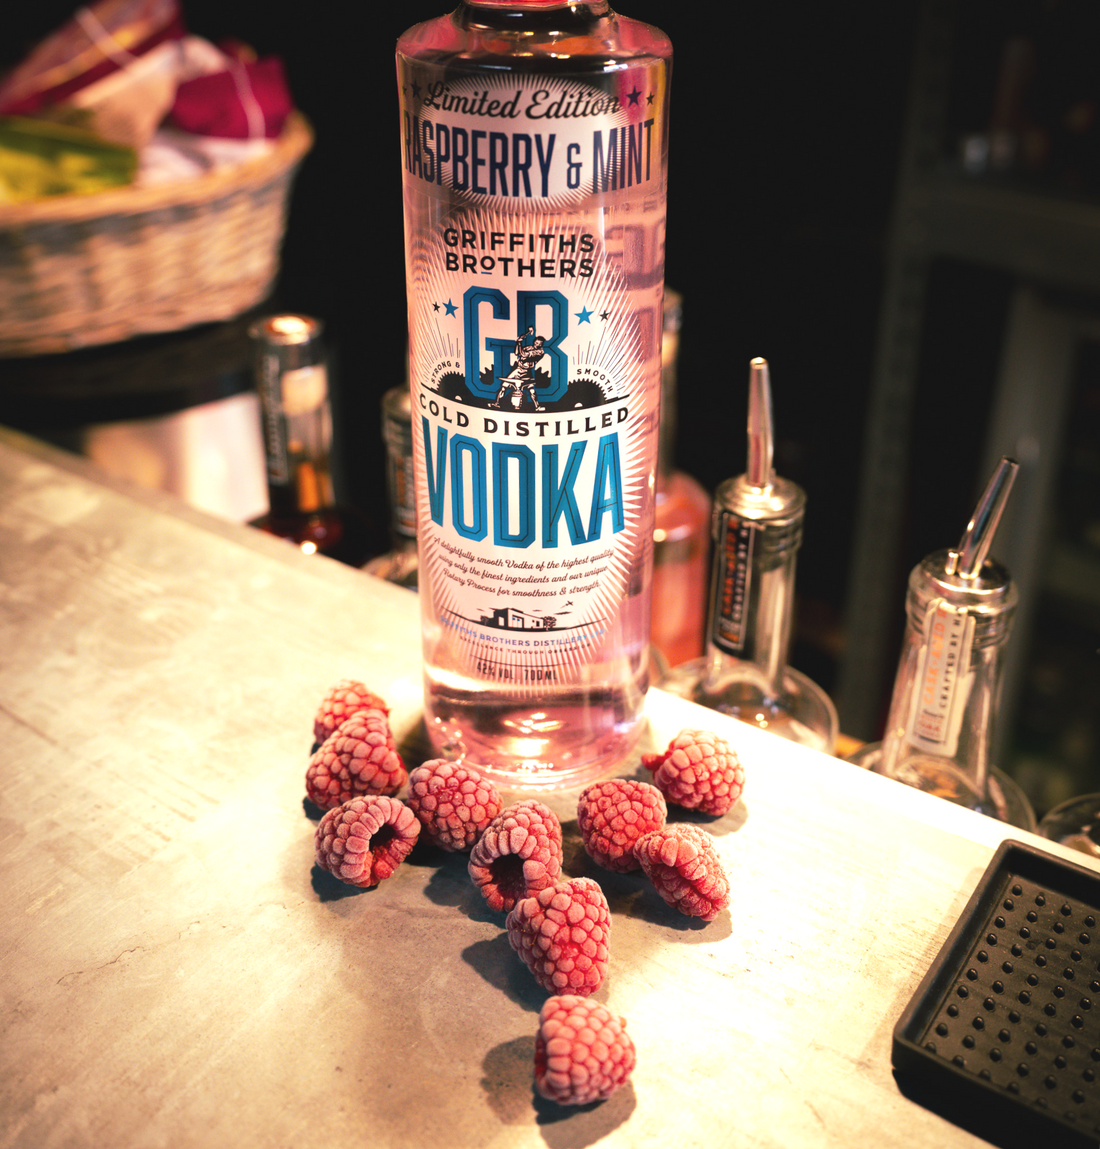 Griffiths Brothers Raspberry & Mint Vodka (70cl, 42%)